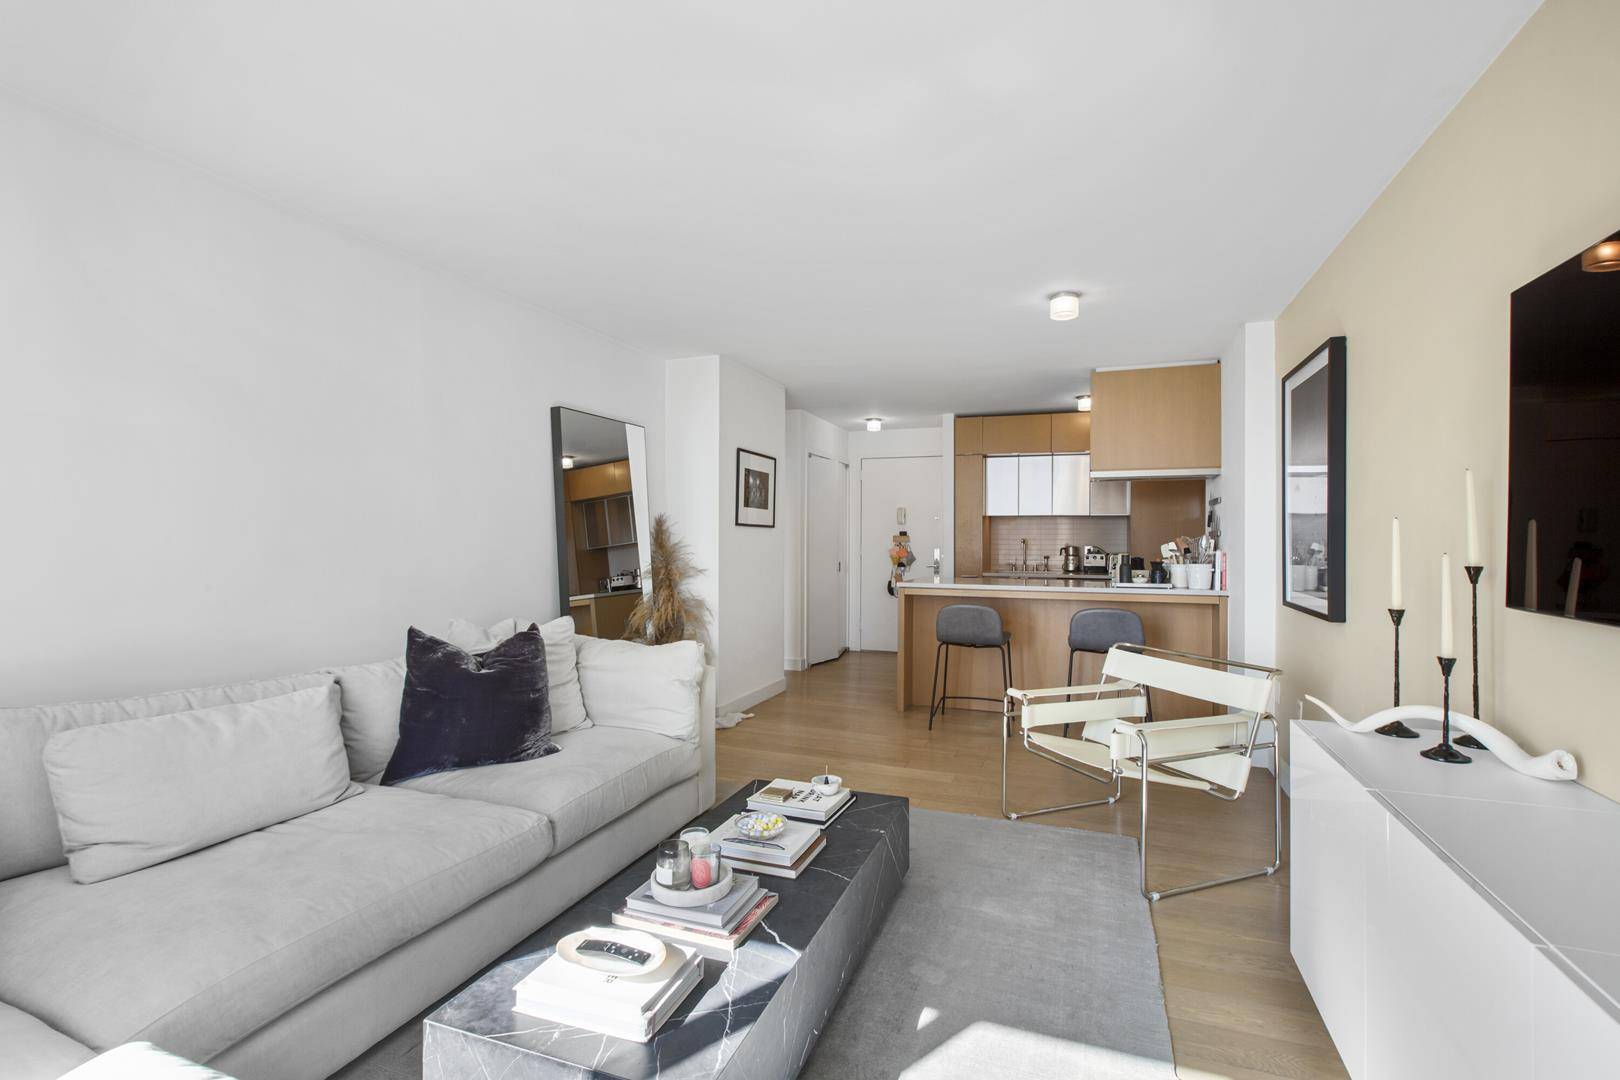 Welcome home to this light filled, South facing one bedroom apartment.